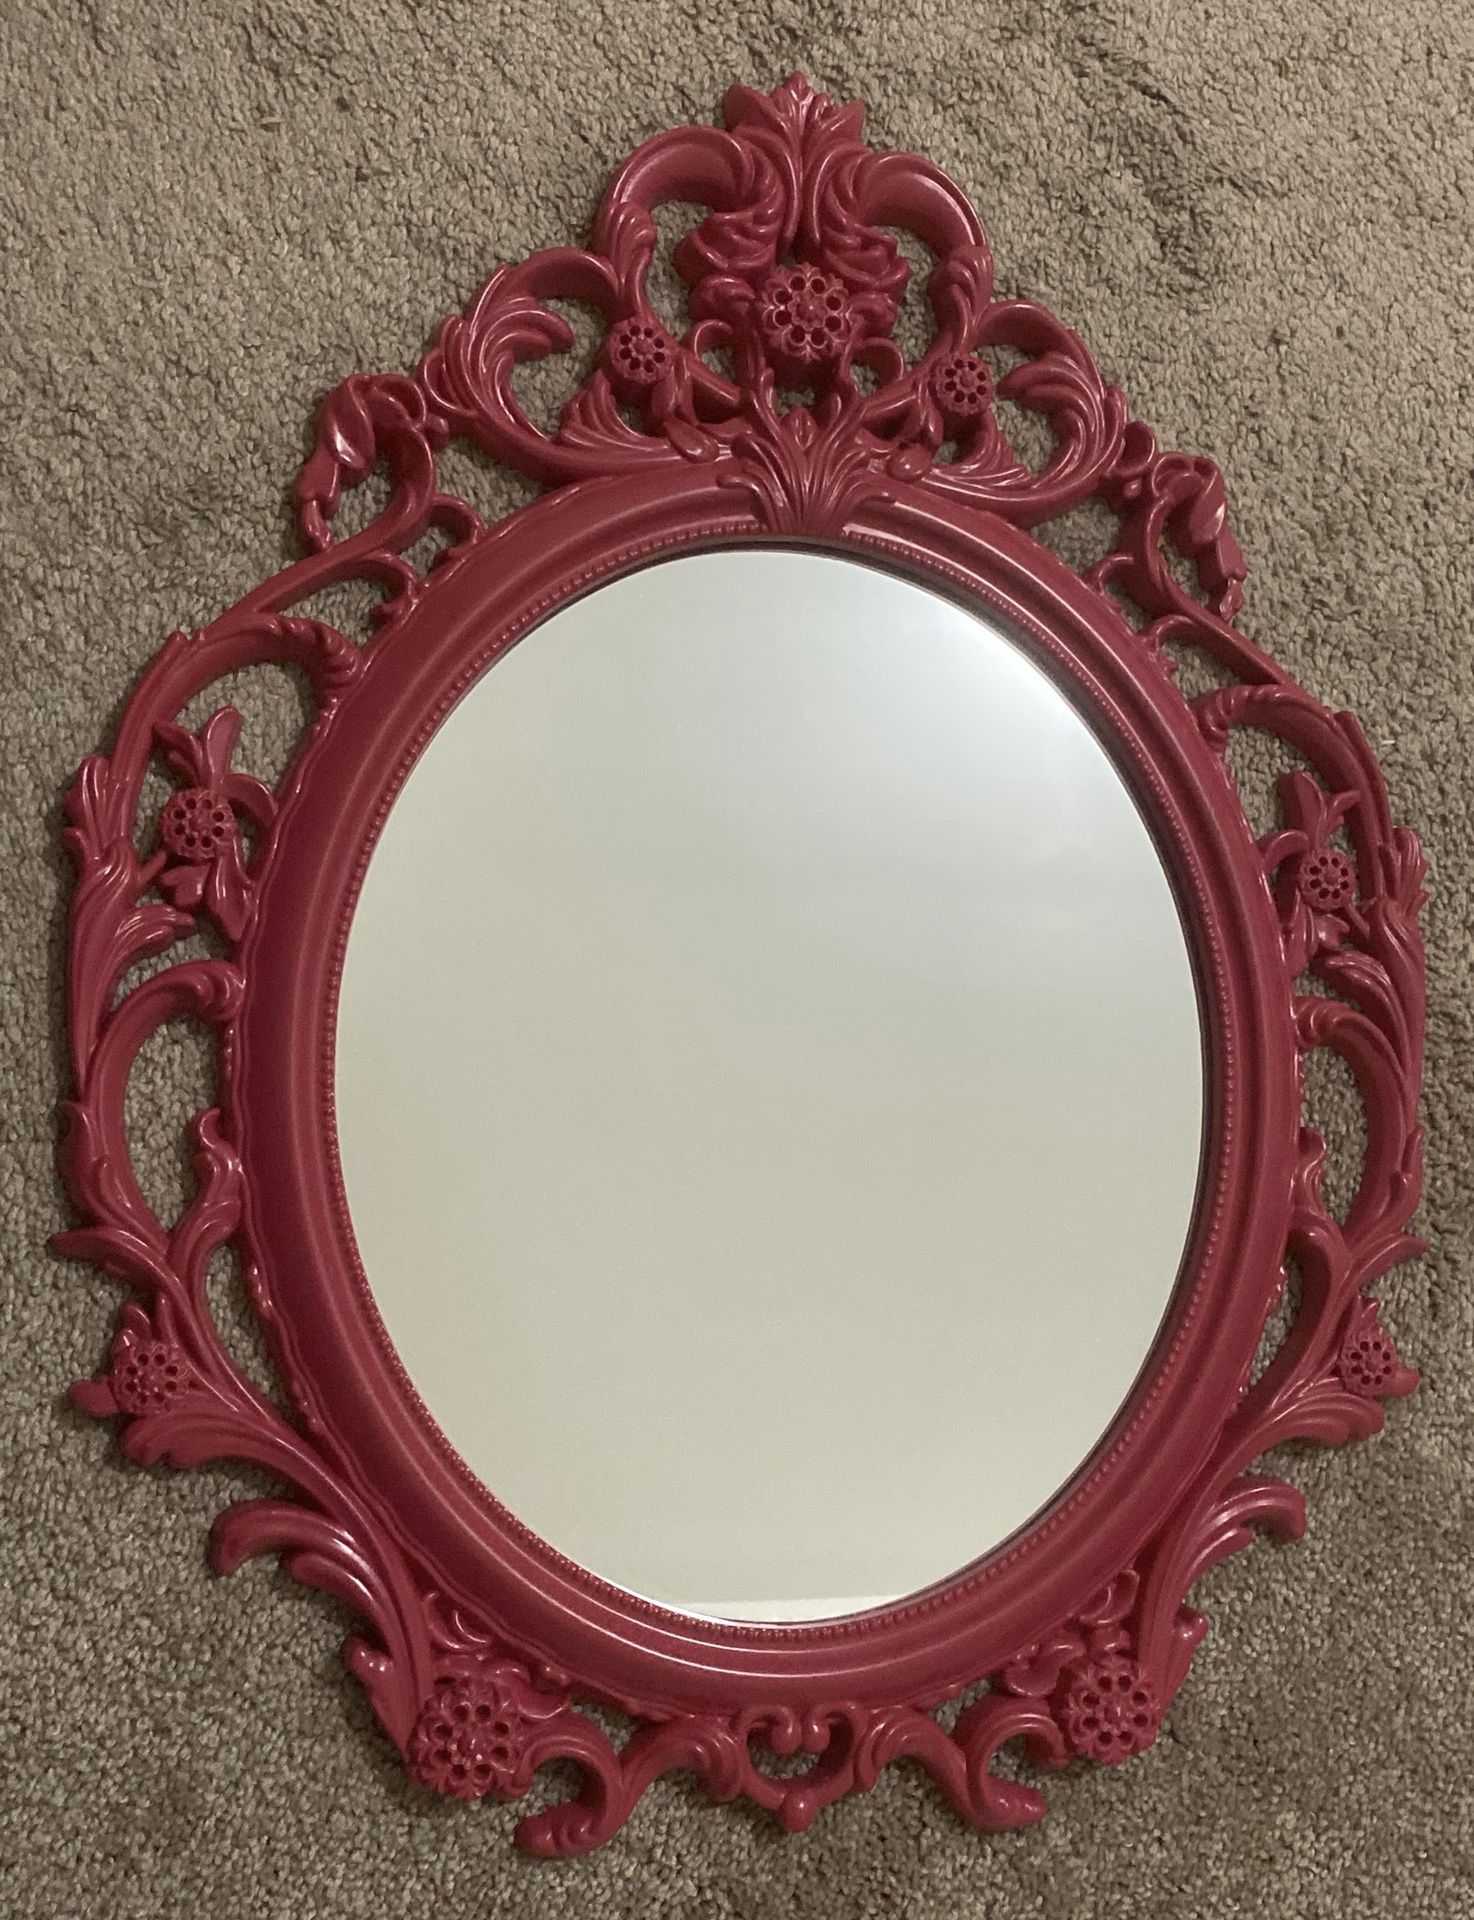 VINTAGE SHABBY CHIC PINK PLASTIC PRINCESS BAROQUE ORNATE OVAL WALL HANGING FRAME HOME DECOR ACCENT WITH FREE MIRROR INCLUDED BY BETTER HOMES AND GARD